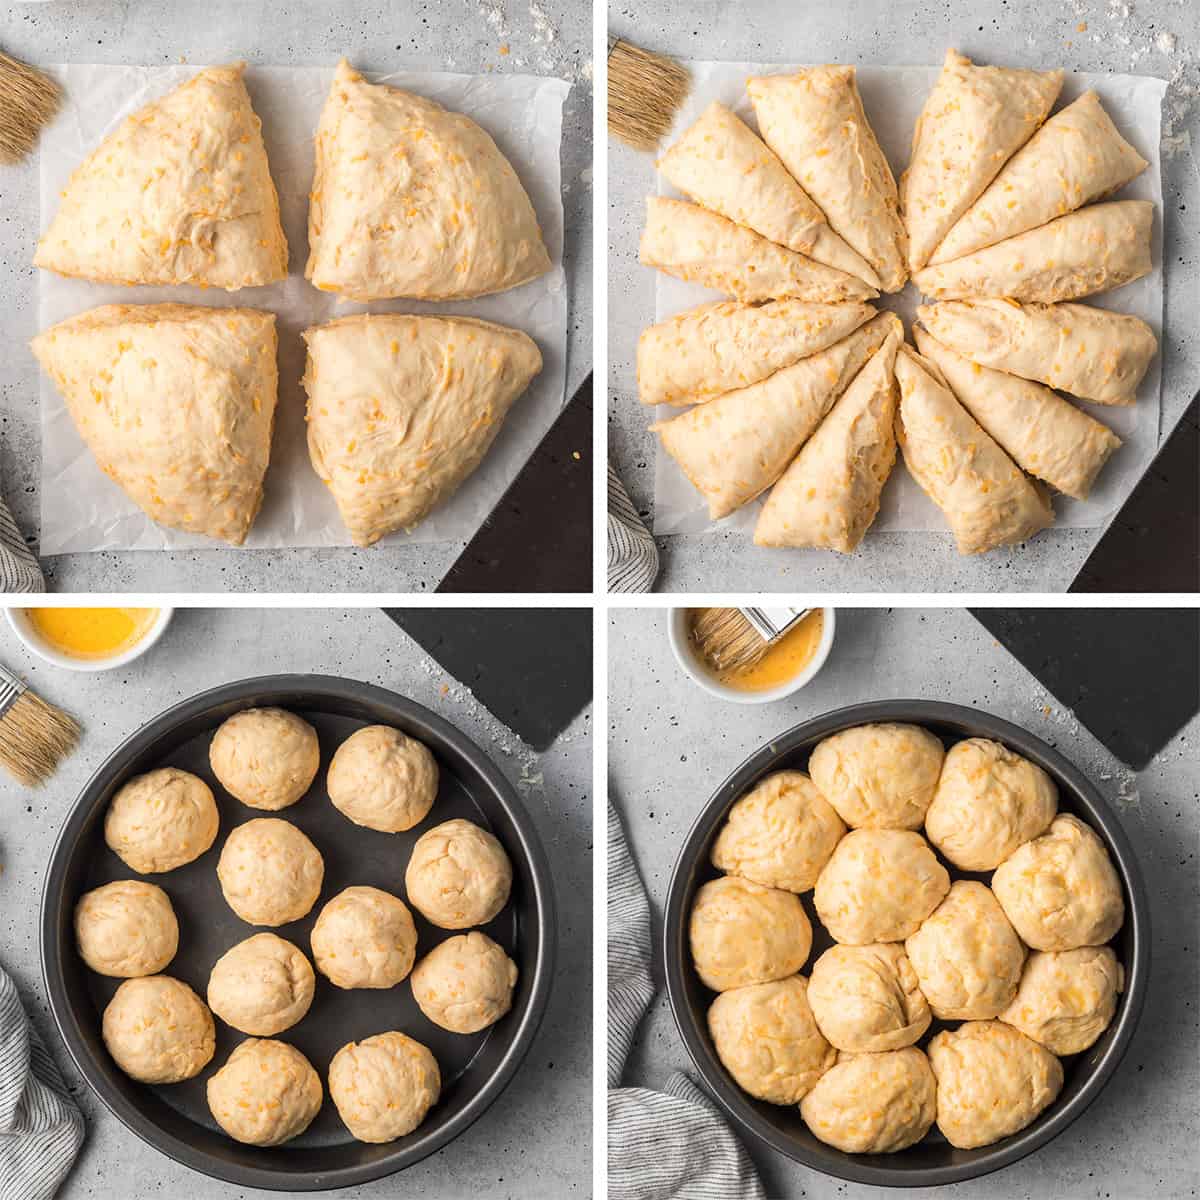 Four images of cheddar dinner roll dough cut into even sized pieces, rolled i to balls and placed in a round metal cake pan.